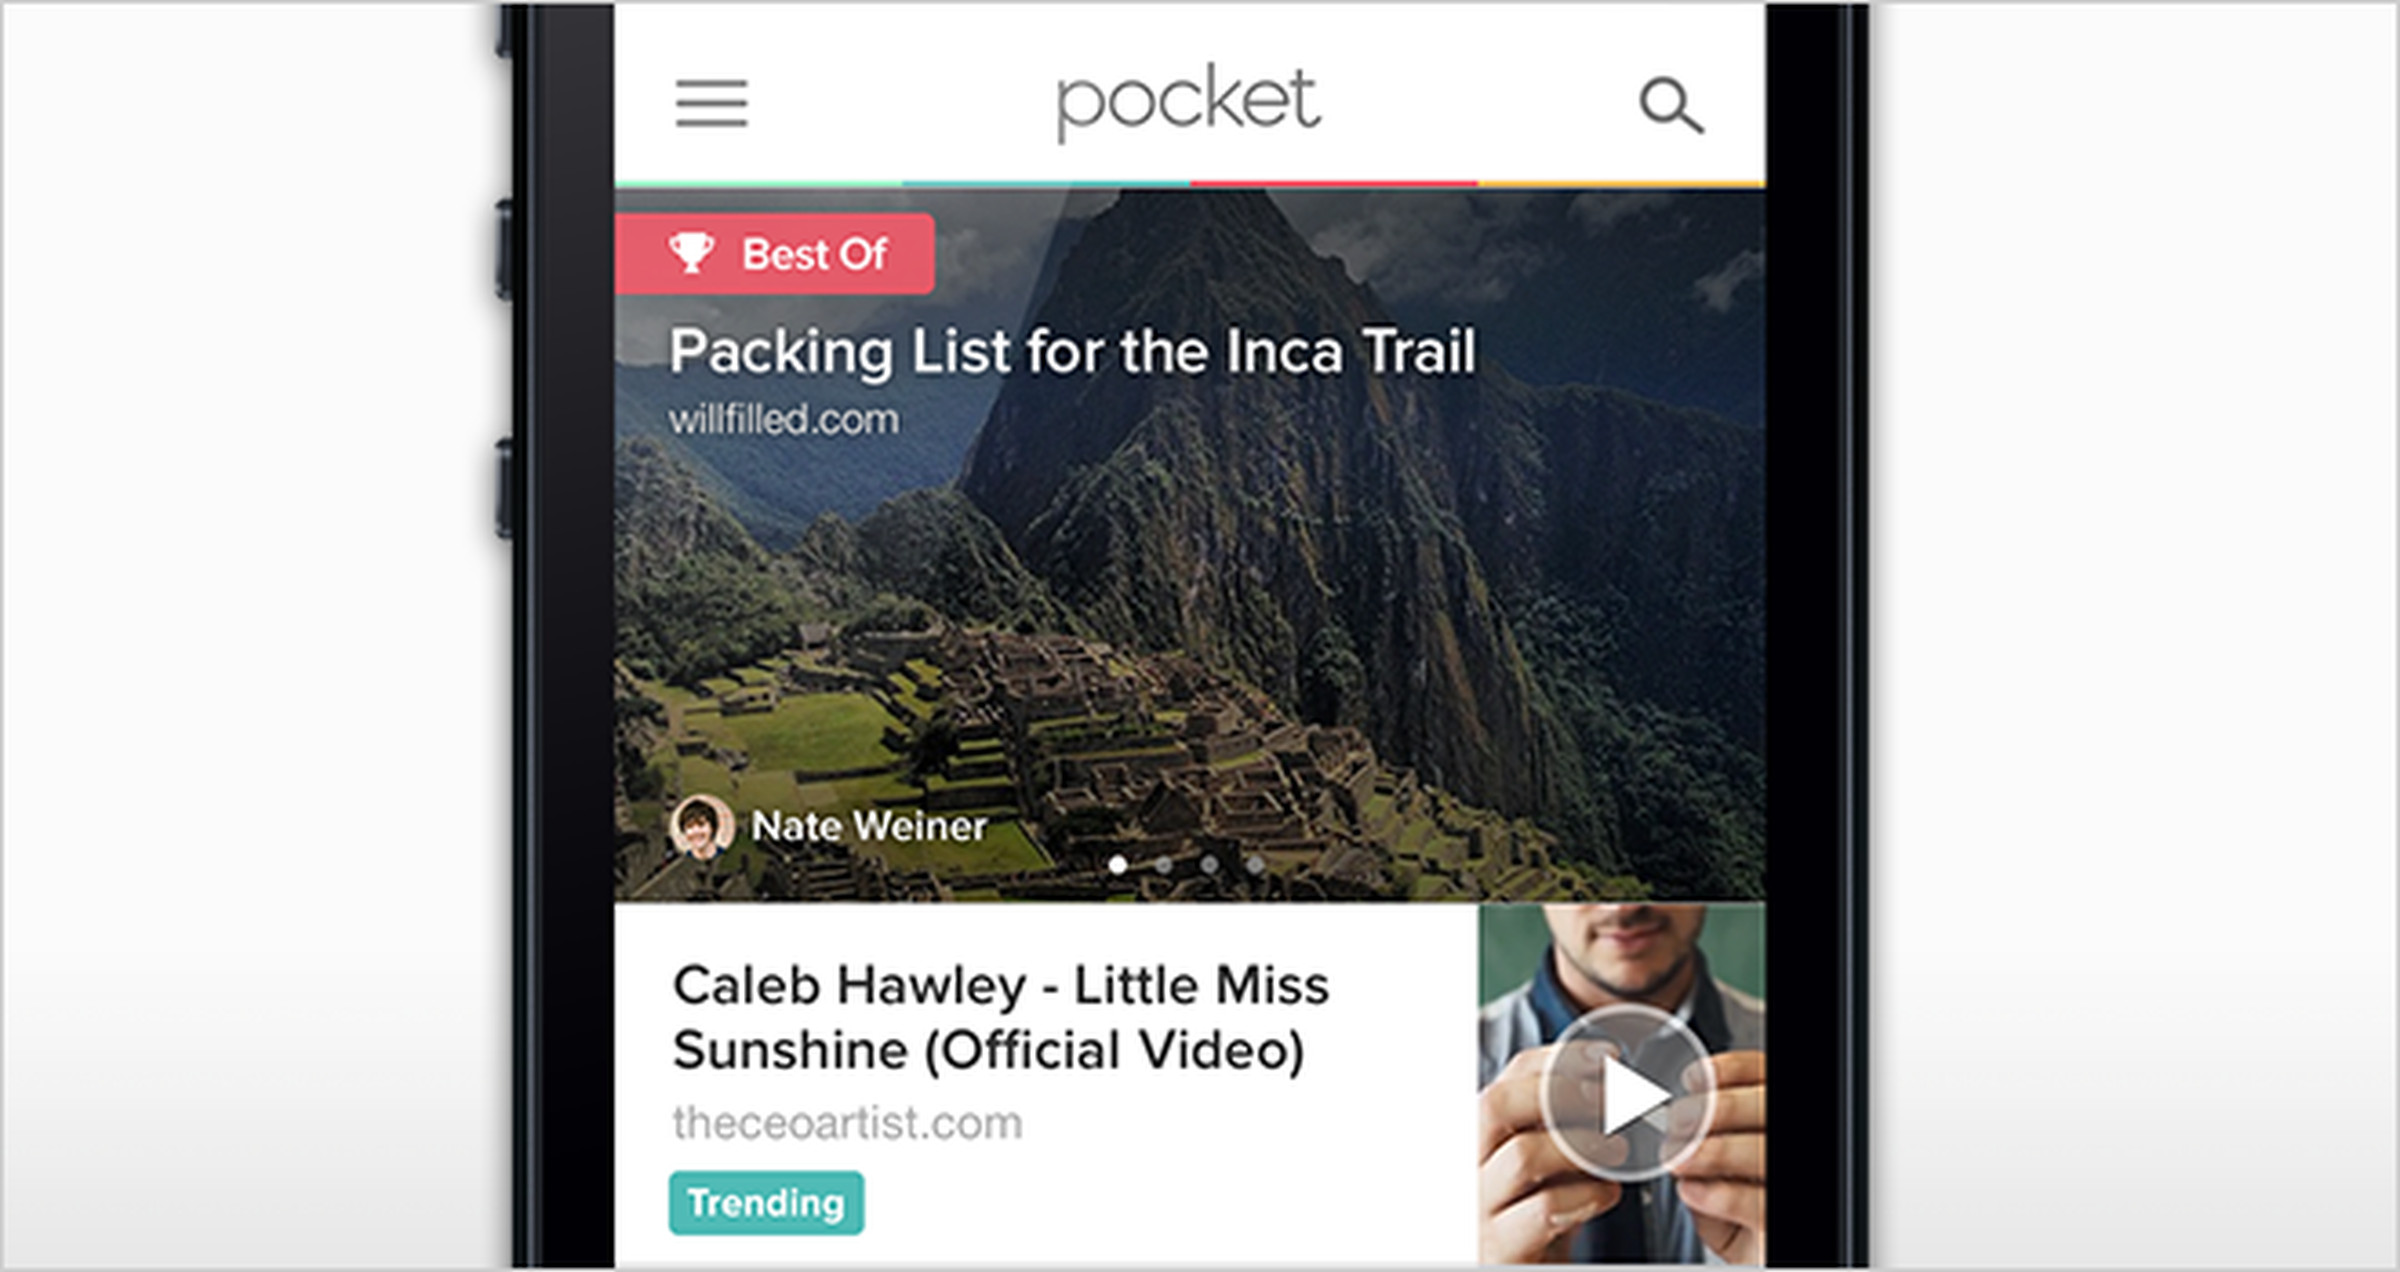 Pocket adds Highlights and Preferences in version 5.0